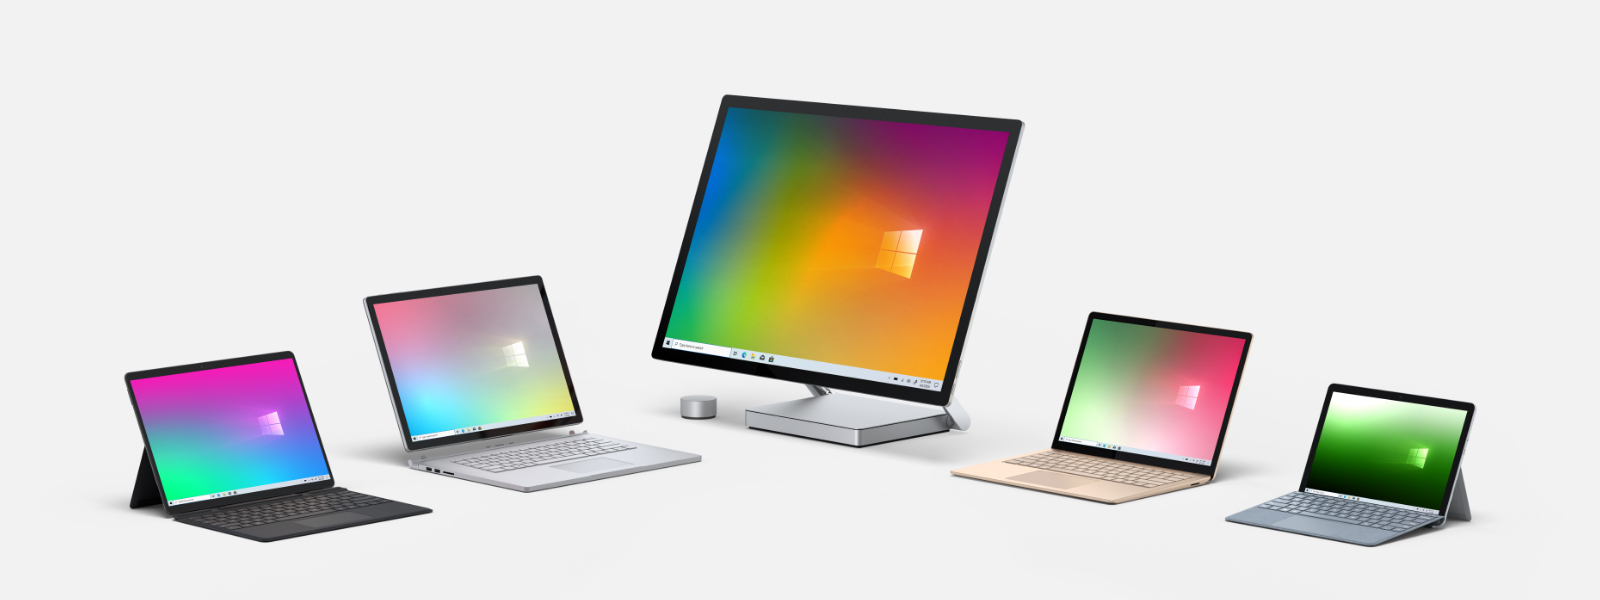 PCs with Windows Pride backgrounds